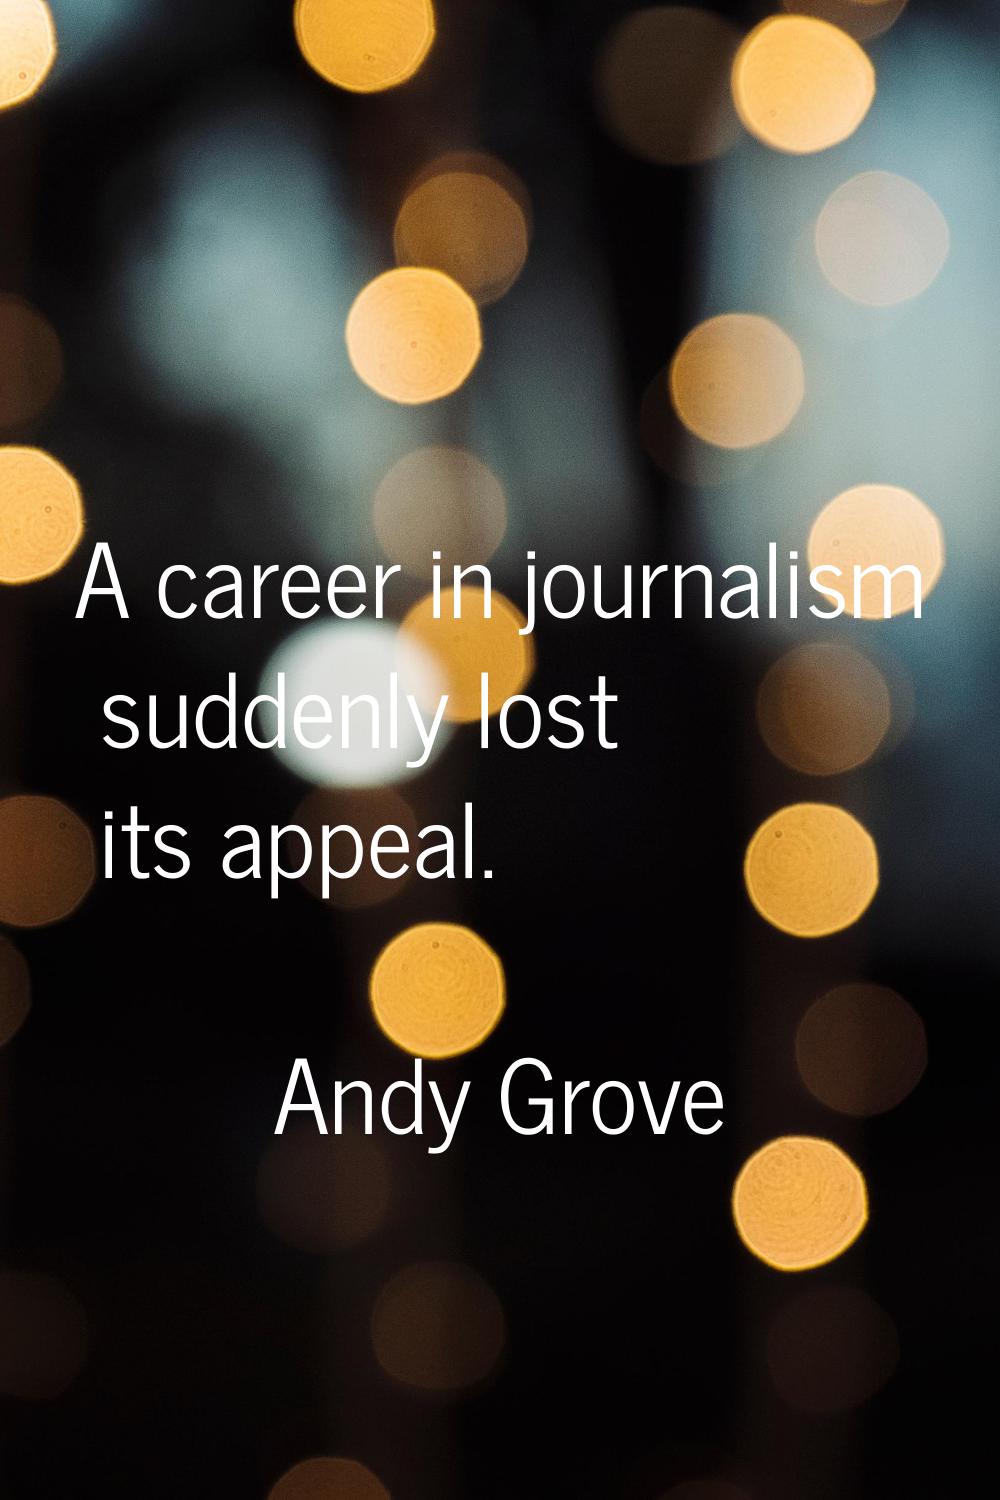 A career in journalism suddenly lost its appeal.